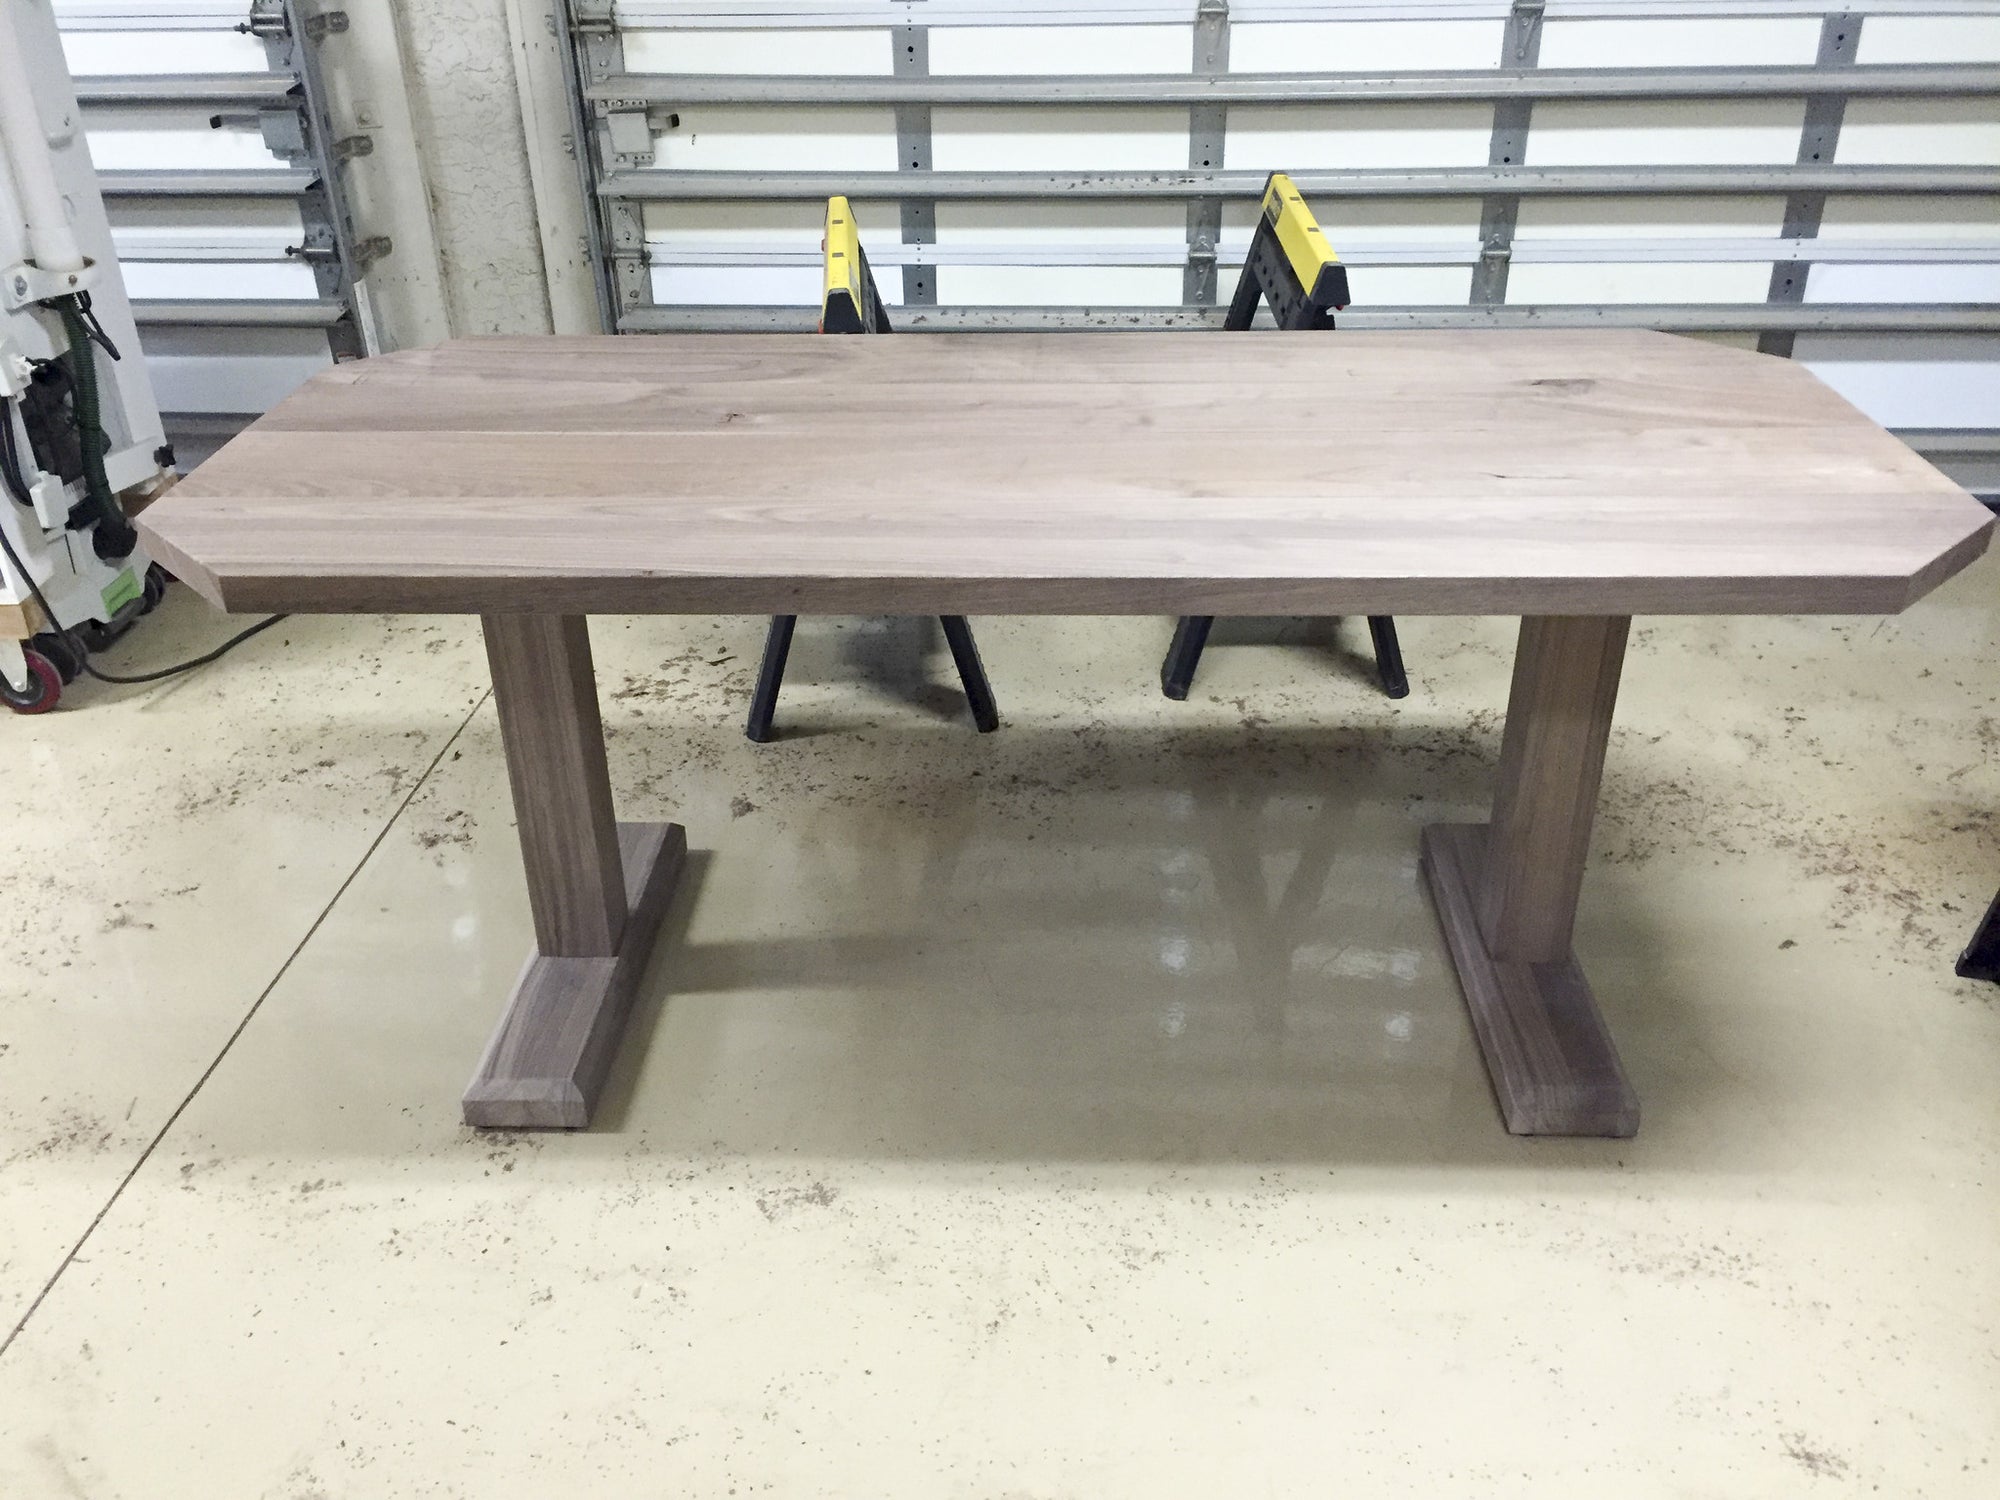 The Space Saving Bench Table (modified to your specifications)